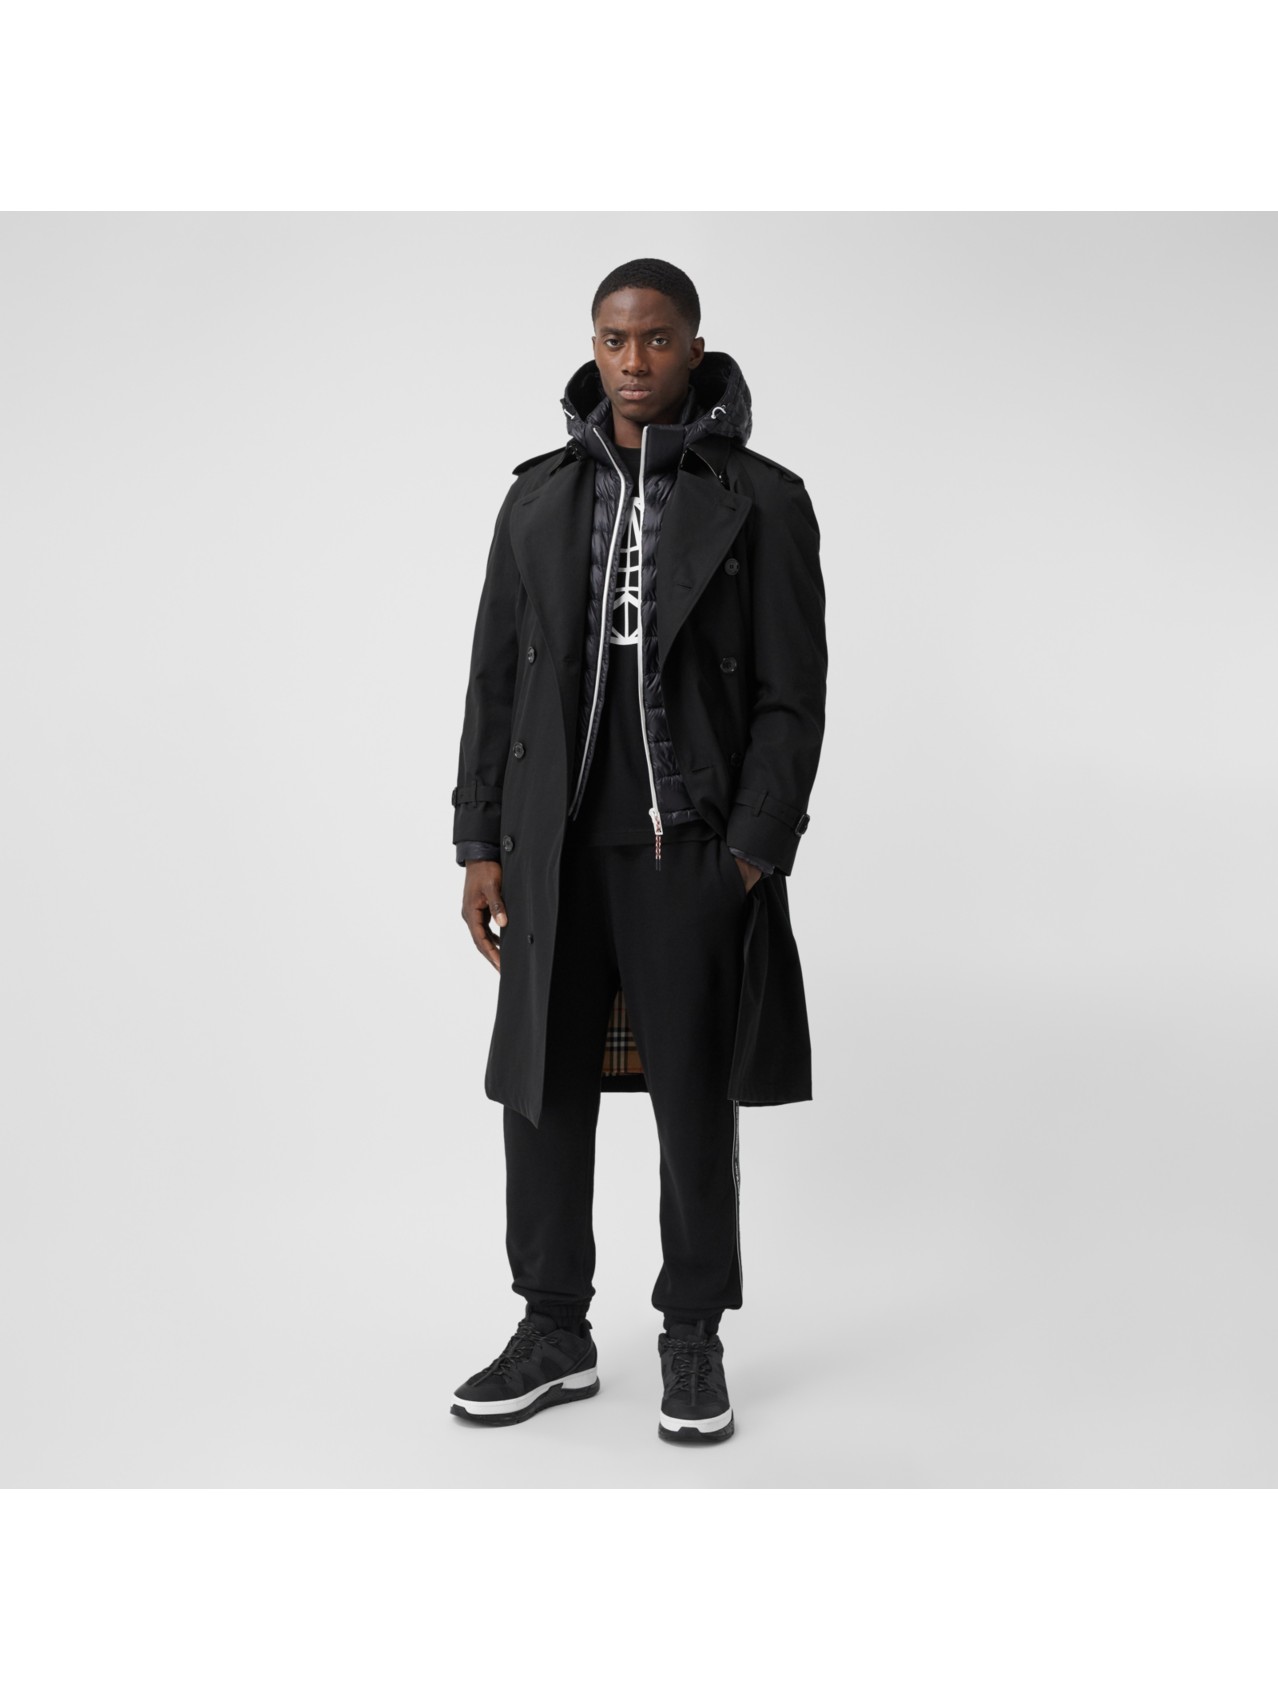 Men’s Trench Coats | Heritage Trench Coats | Burberry® Official